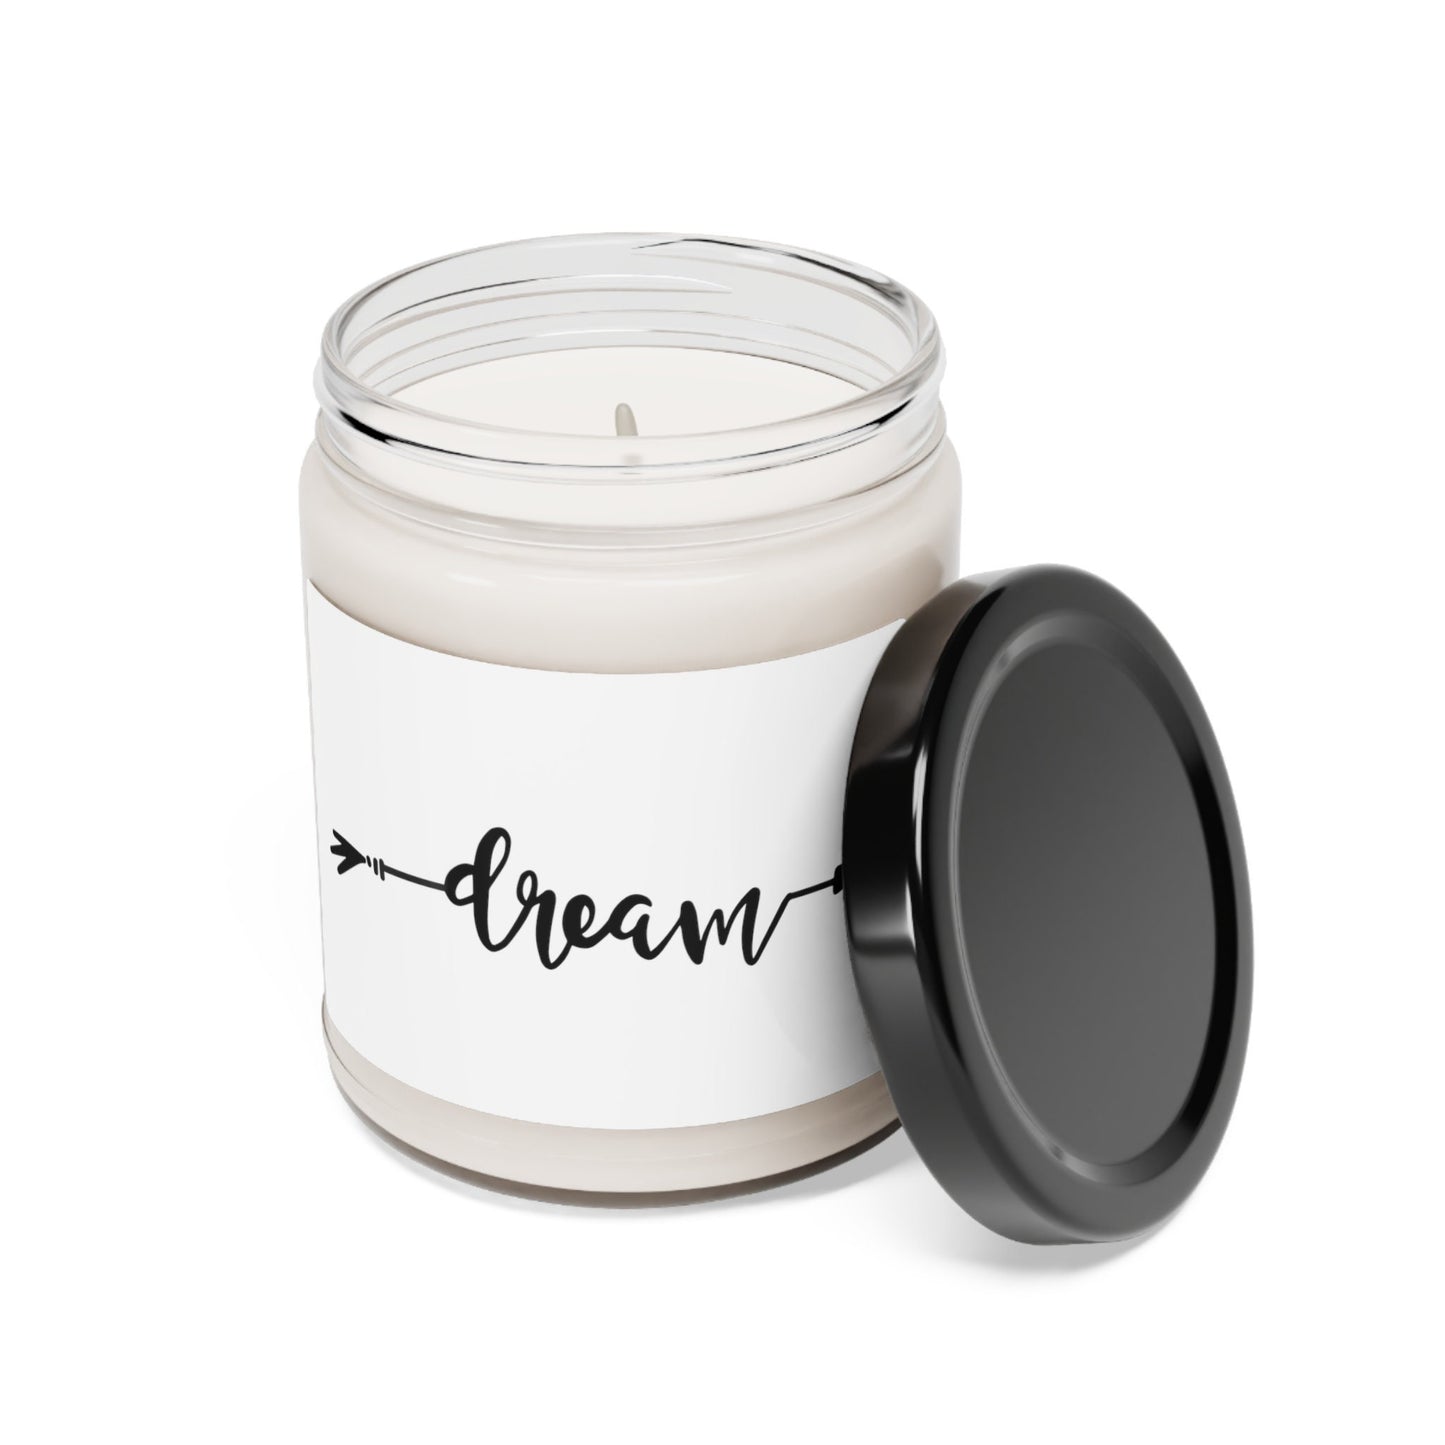 Dream Scented Soy Candle, 9oz